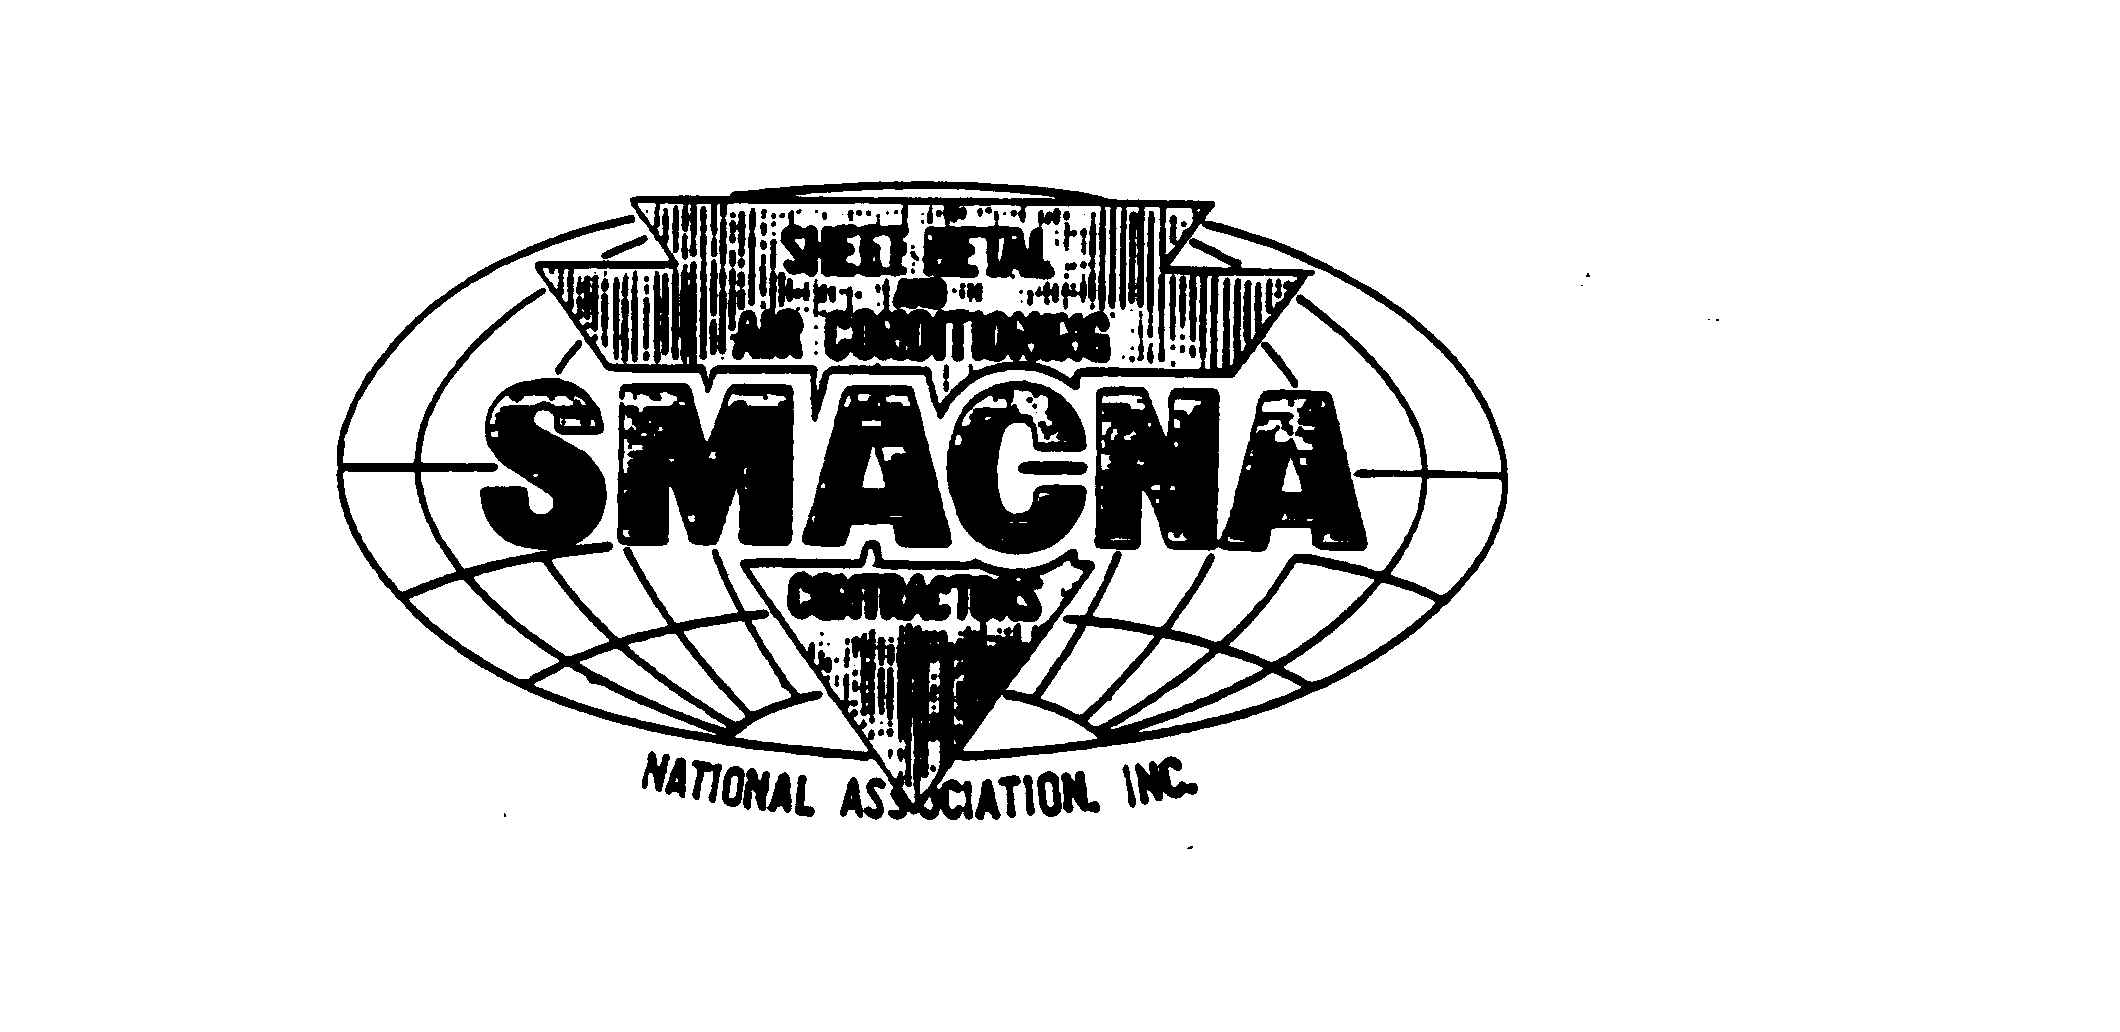  SMACNA SHEET METAL AND AIR CONDITIONING CONTRACTORS NATIONAL ASSOCIATION, INC.